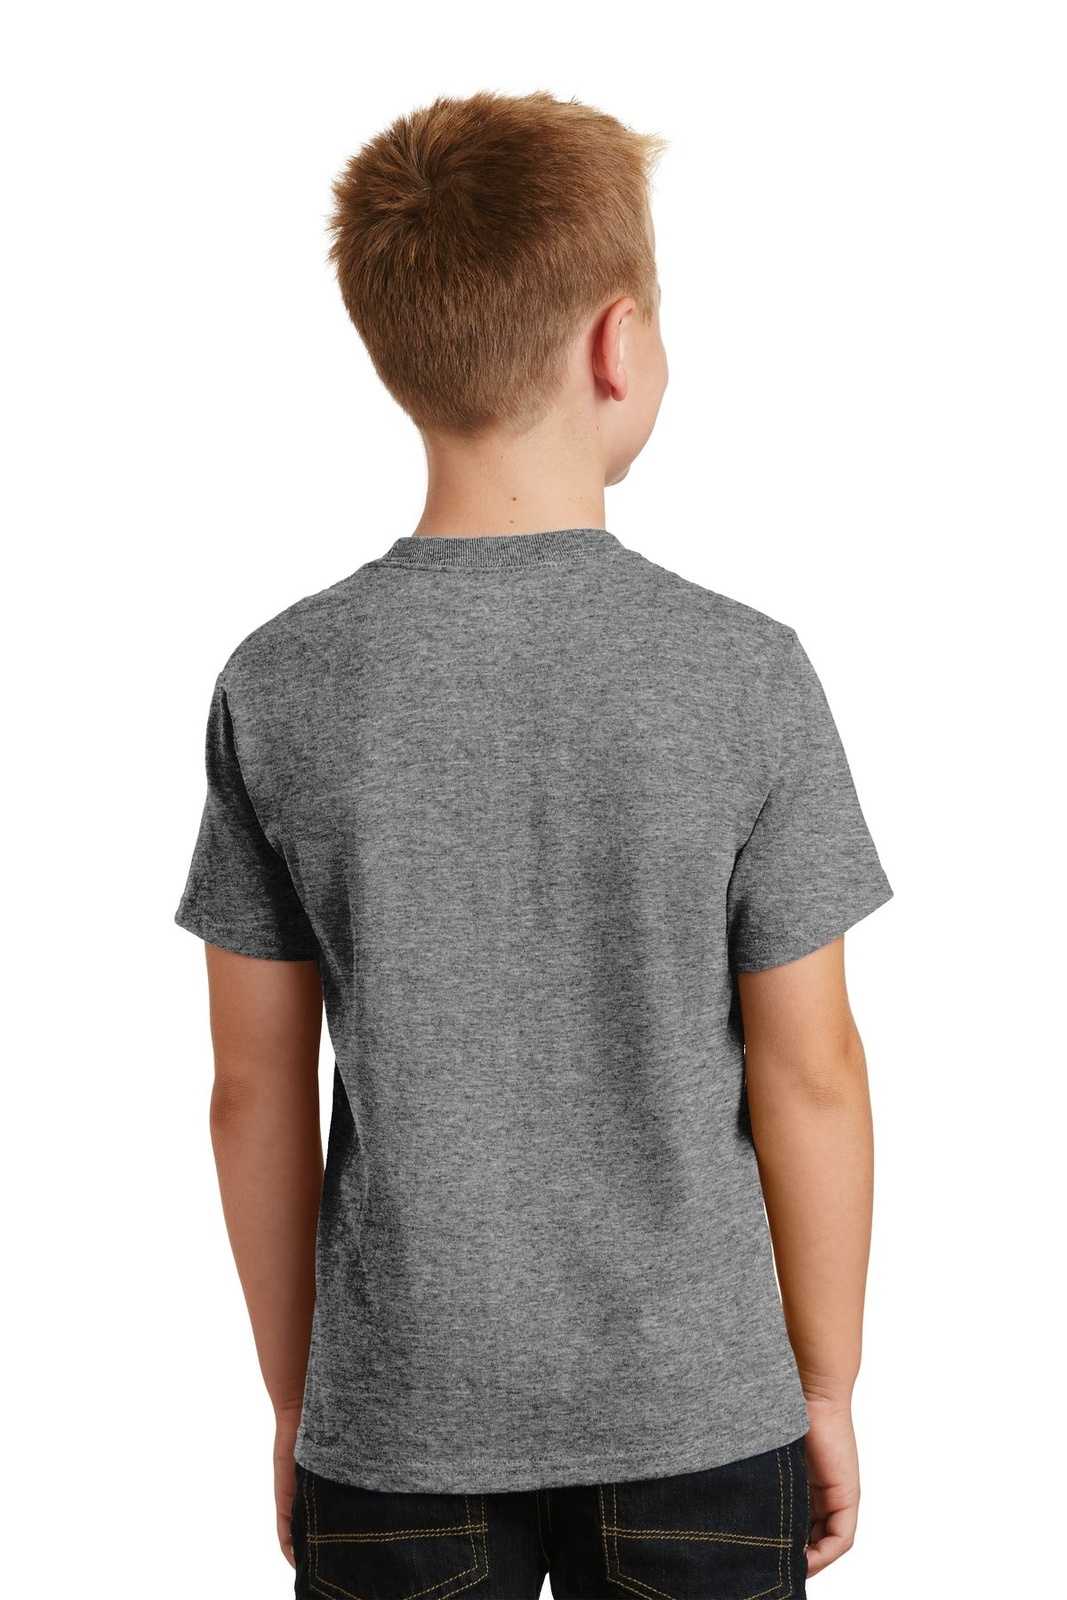 Port & Company PC54Y Youth Core Cotton Tee - Graphite Heather - HIT a Double - 1